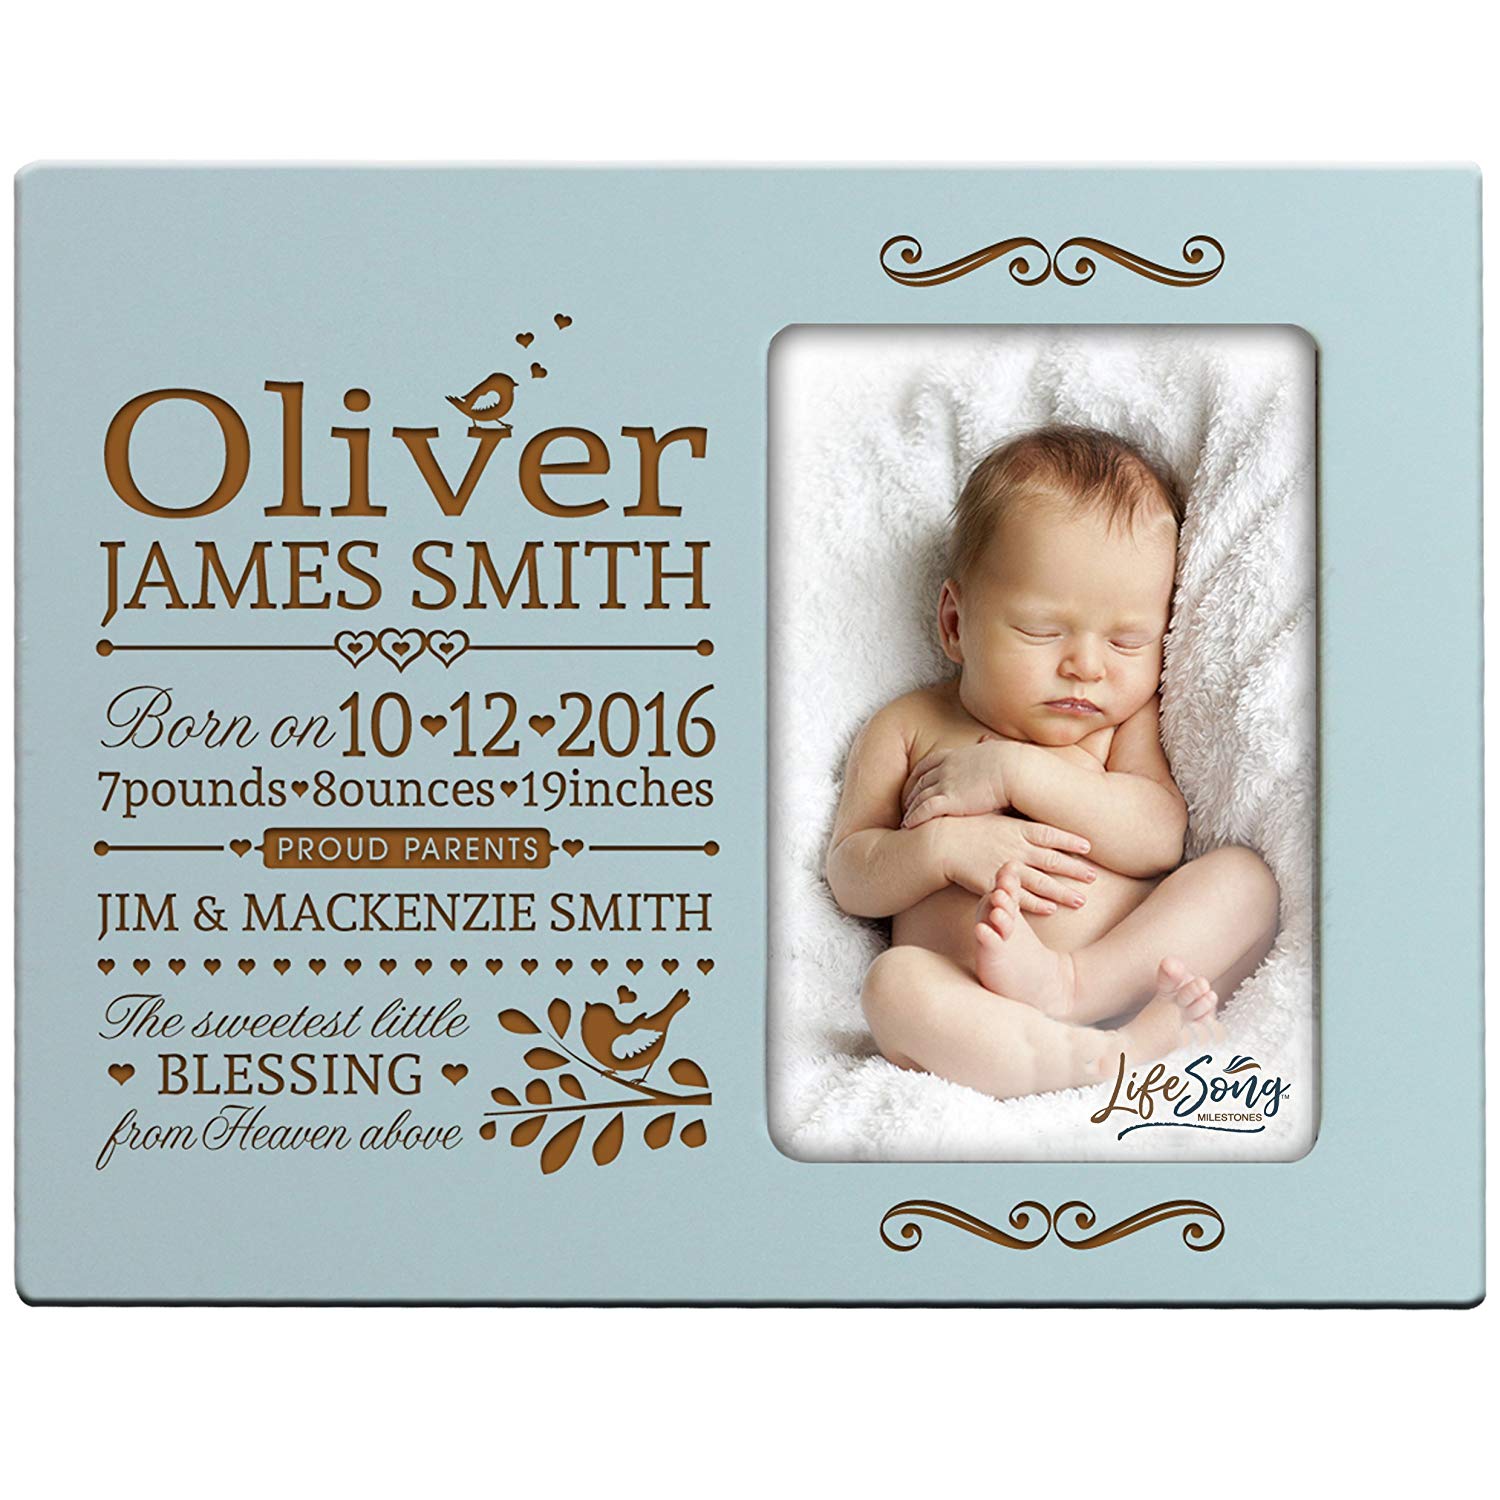 Personalized New Baby Photo Frame - The Sweetest Little Blessing - LifeSong Milestones